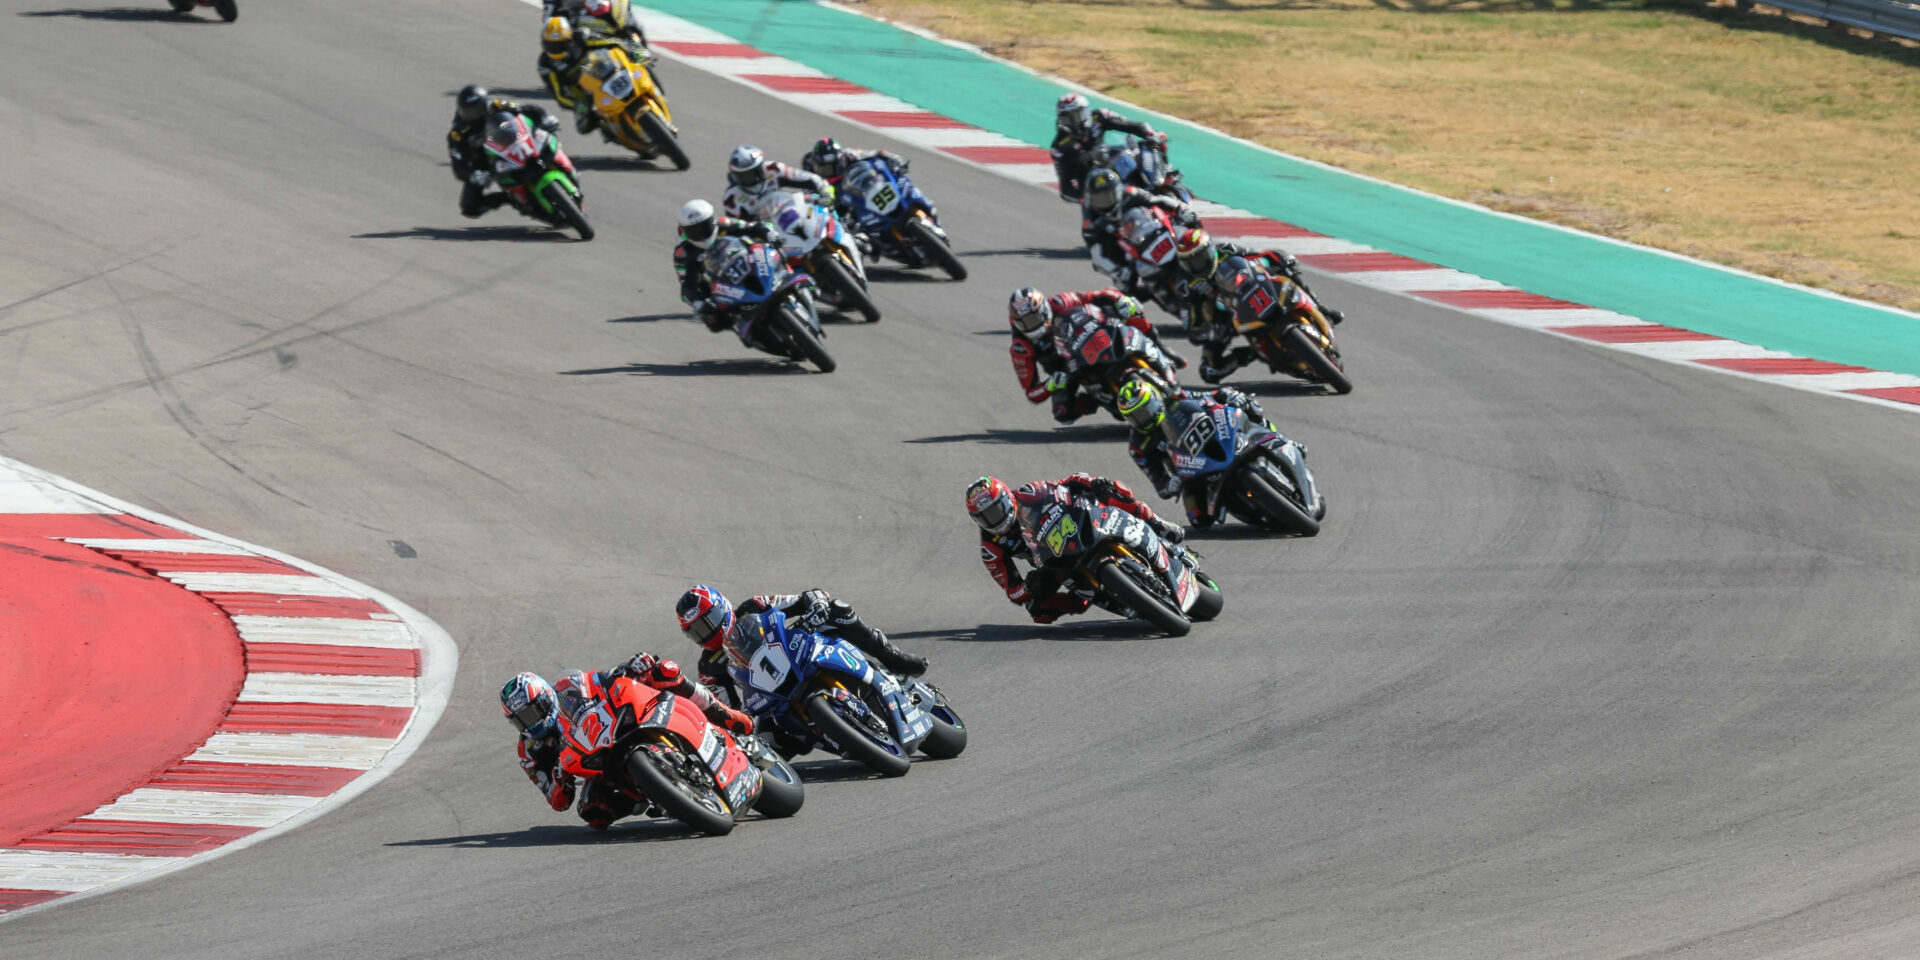 Josh Herrin (2) leads Jake Gagne (1), Richie Escalante (54), PJ Jacobsen (99), Brandon Paasch (96), Mathew Scholtz (11), and the rest of the field in MotoAmerica Superbike Race Two at Circuit of The Americas. Photo by Brian J. Nelson.